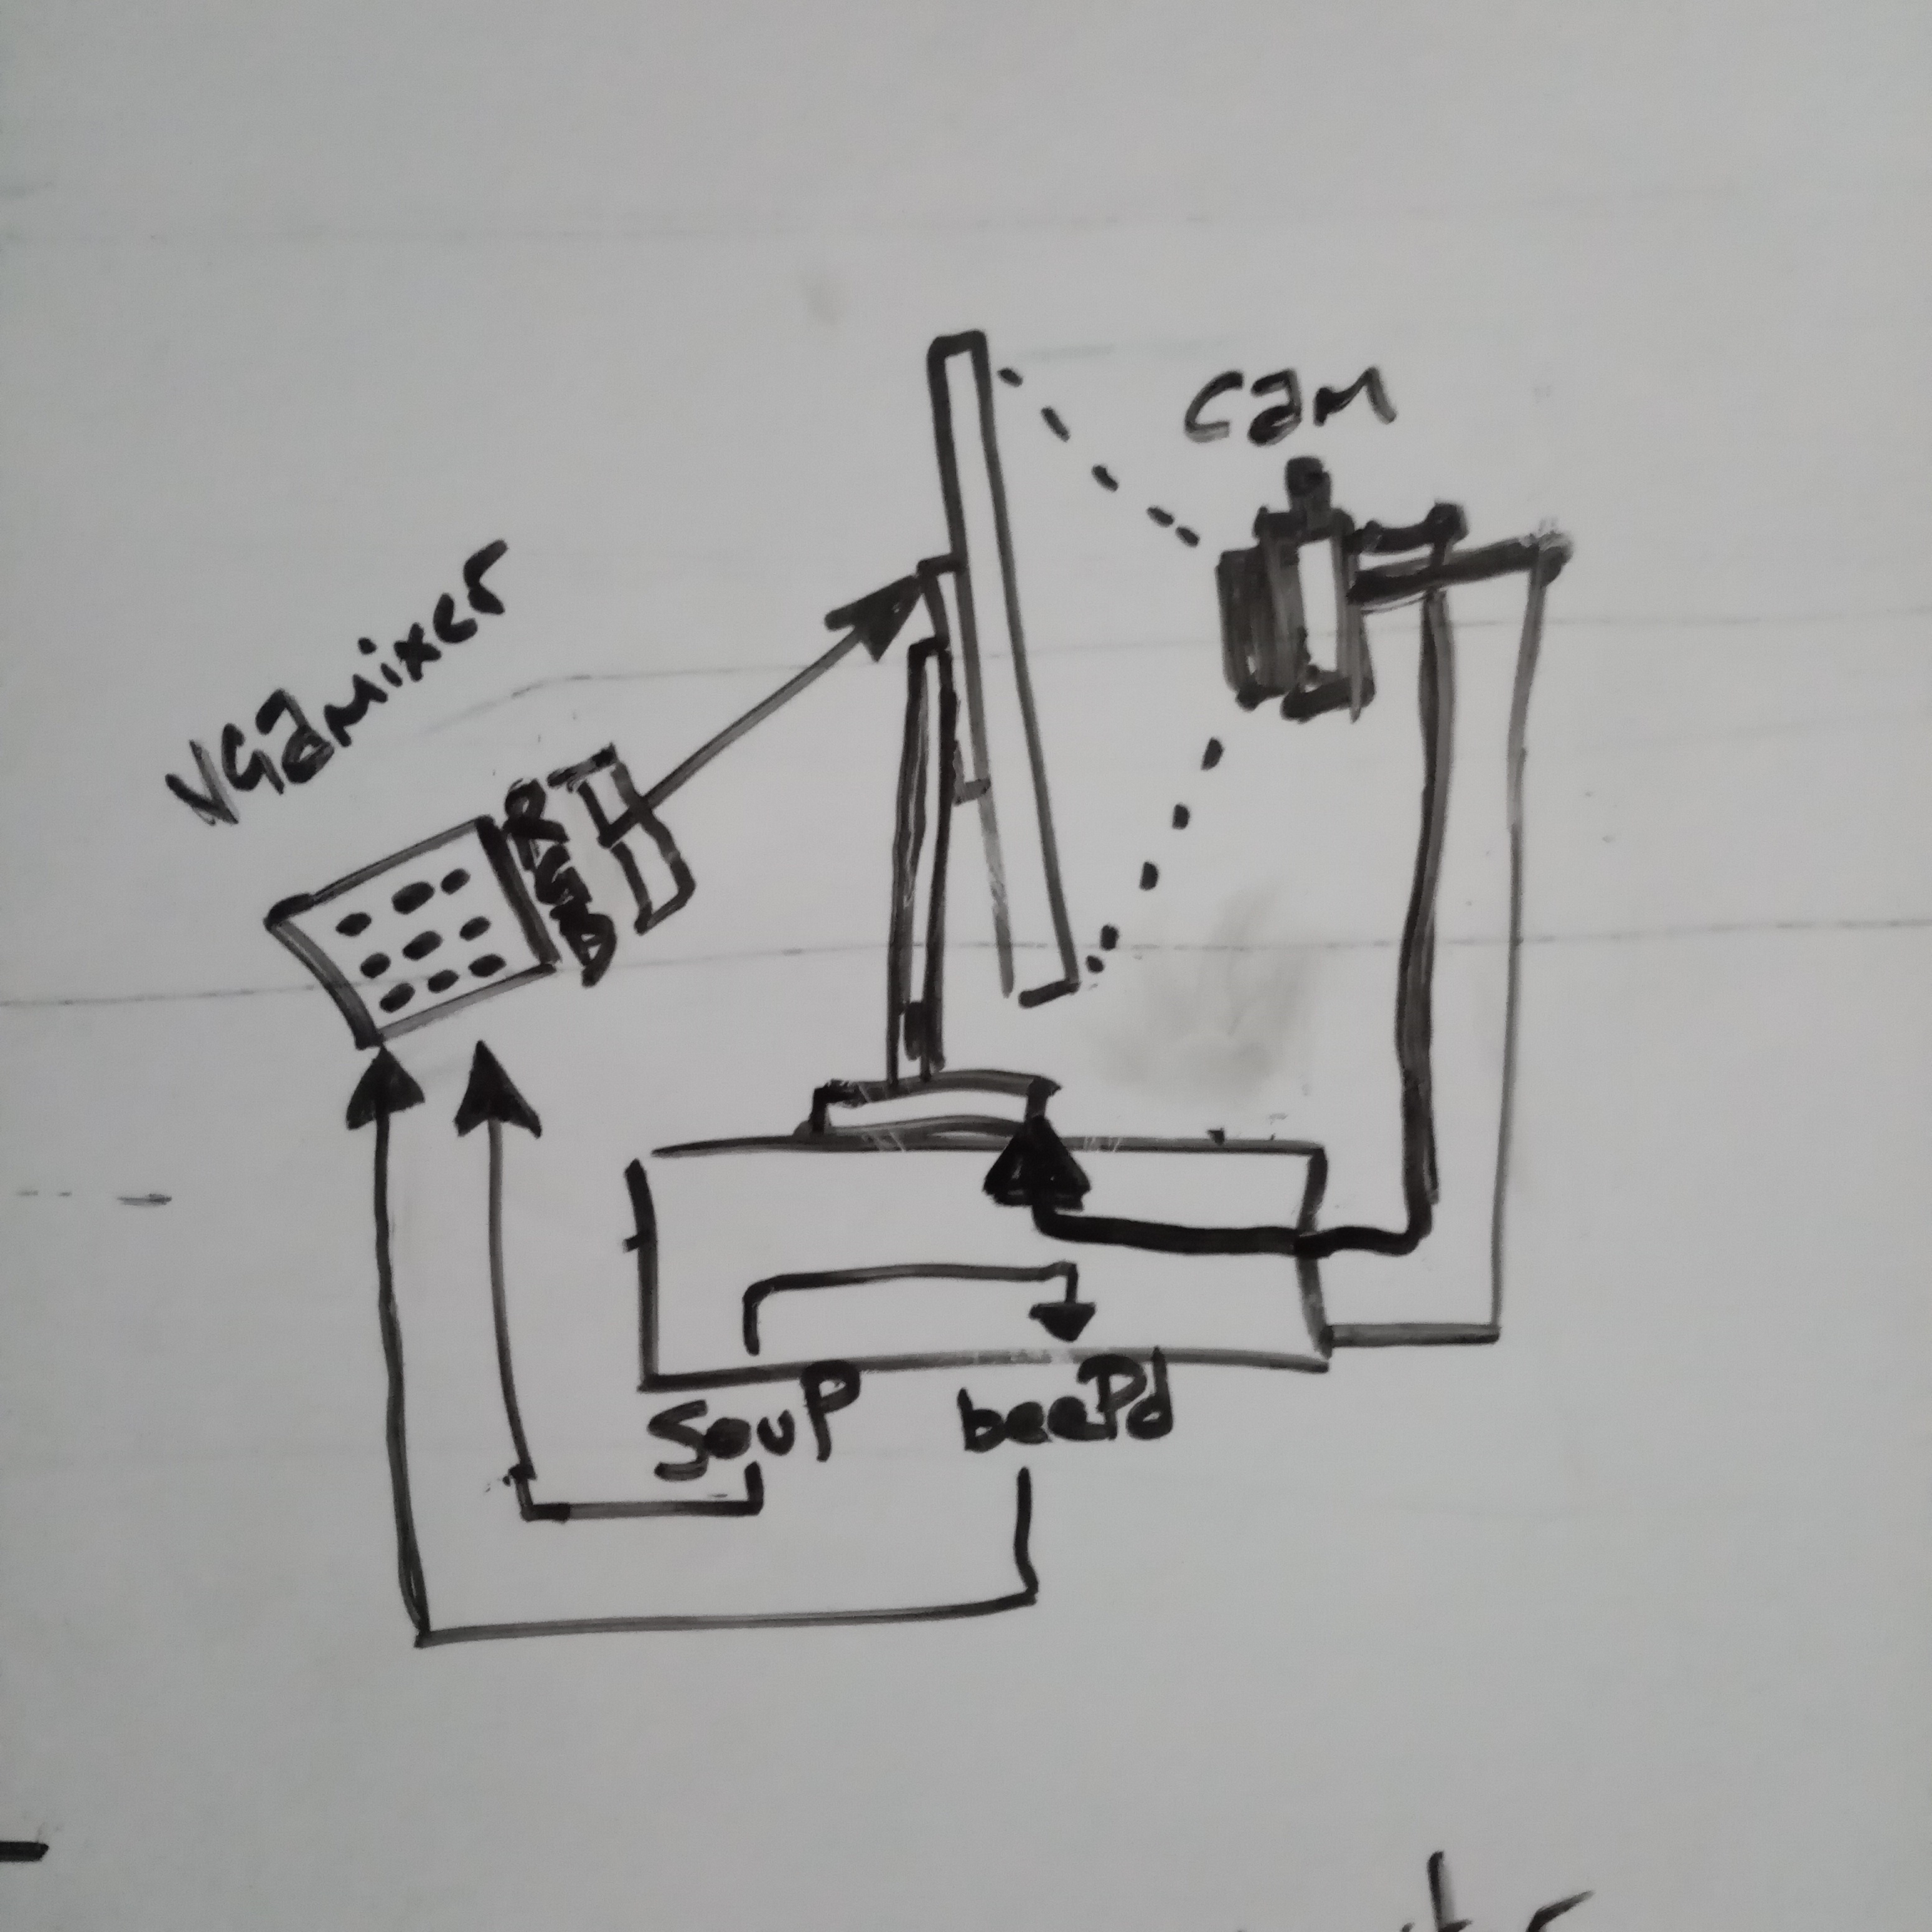 A whiteboard diagram of Kerian's set up. A camera films a screen, putting its output into a computer, which feeds a vga mixer, which feeds the monitor, creating a feedback loop